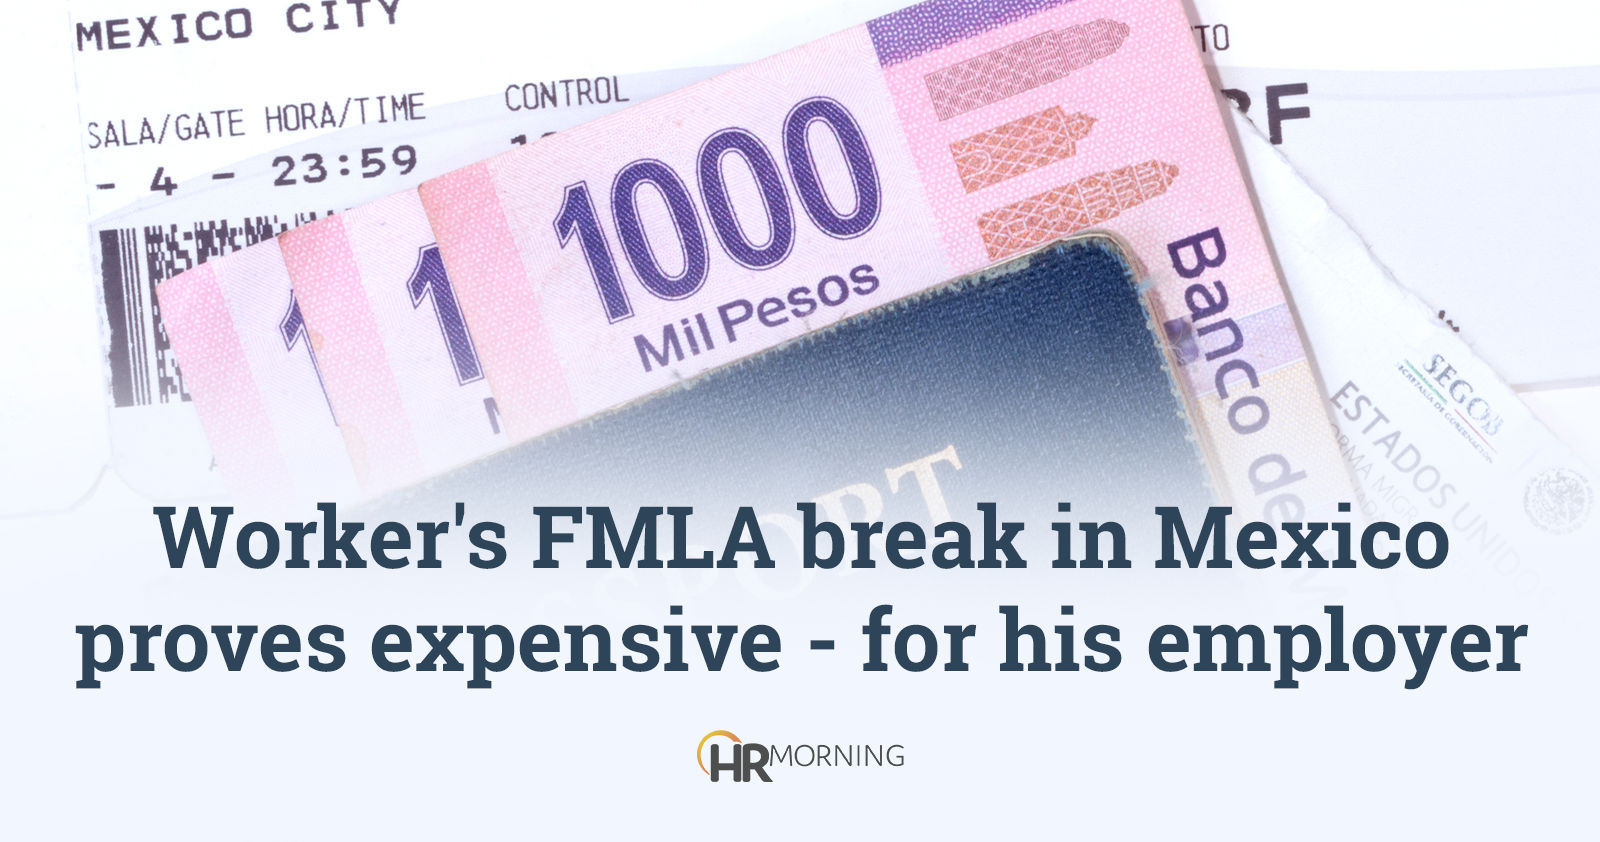 Worker's FMLA break in Mexico proves expensive - for his employer